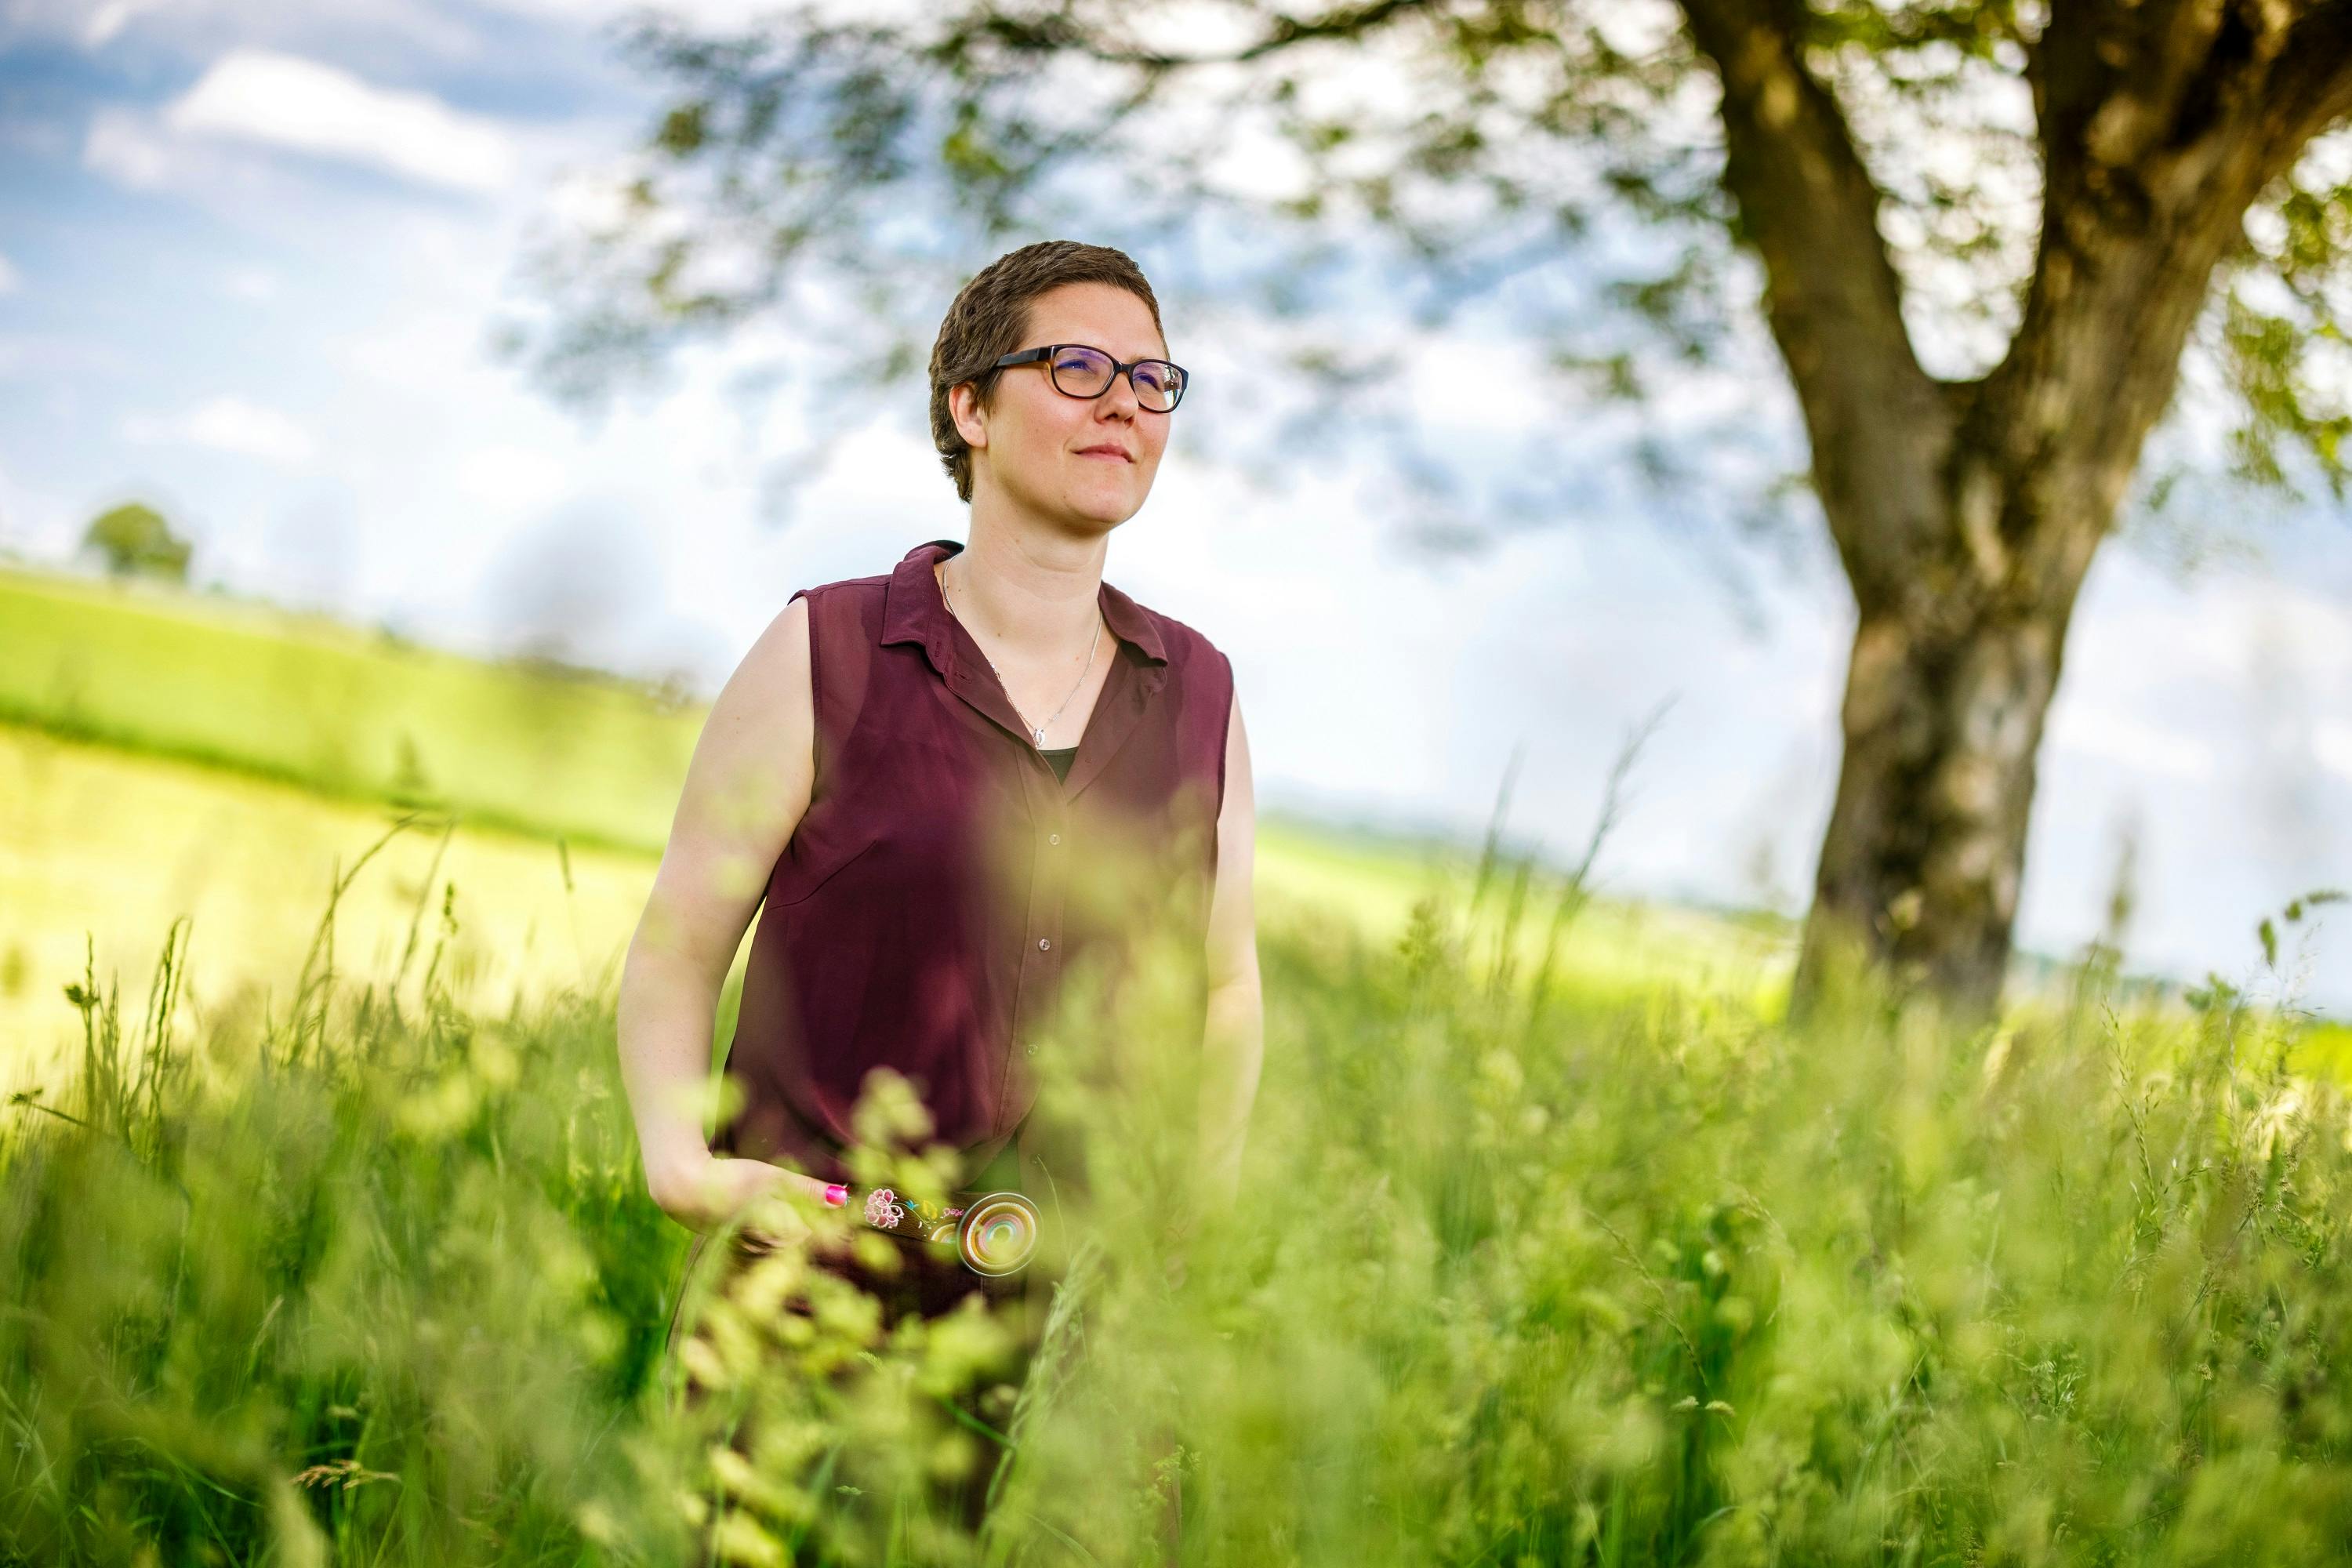 Woman in meadow in sunshine wears glasses and smiles gently.